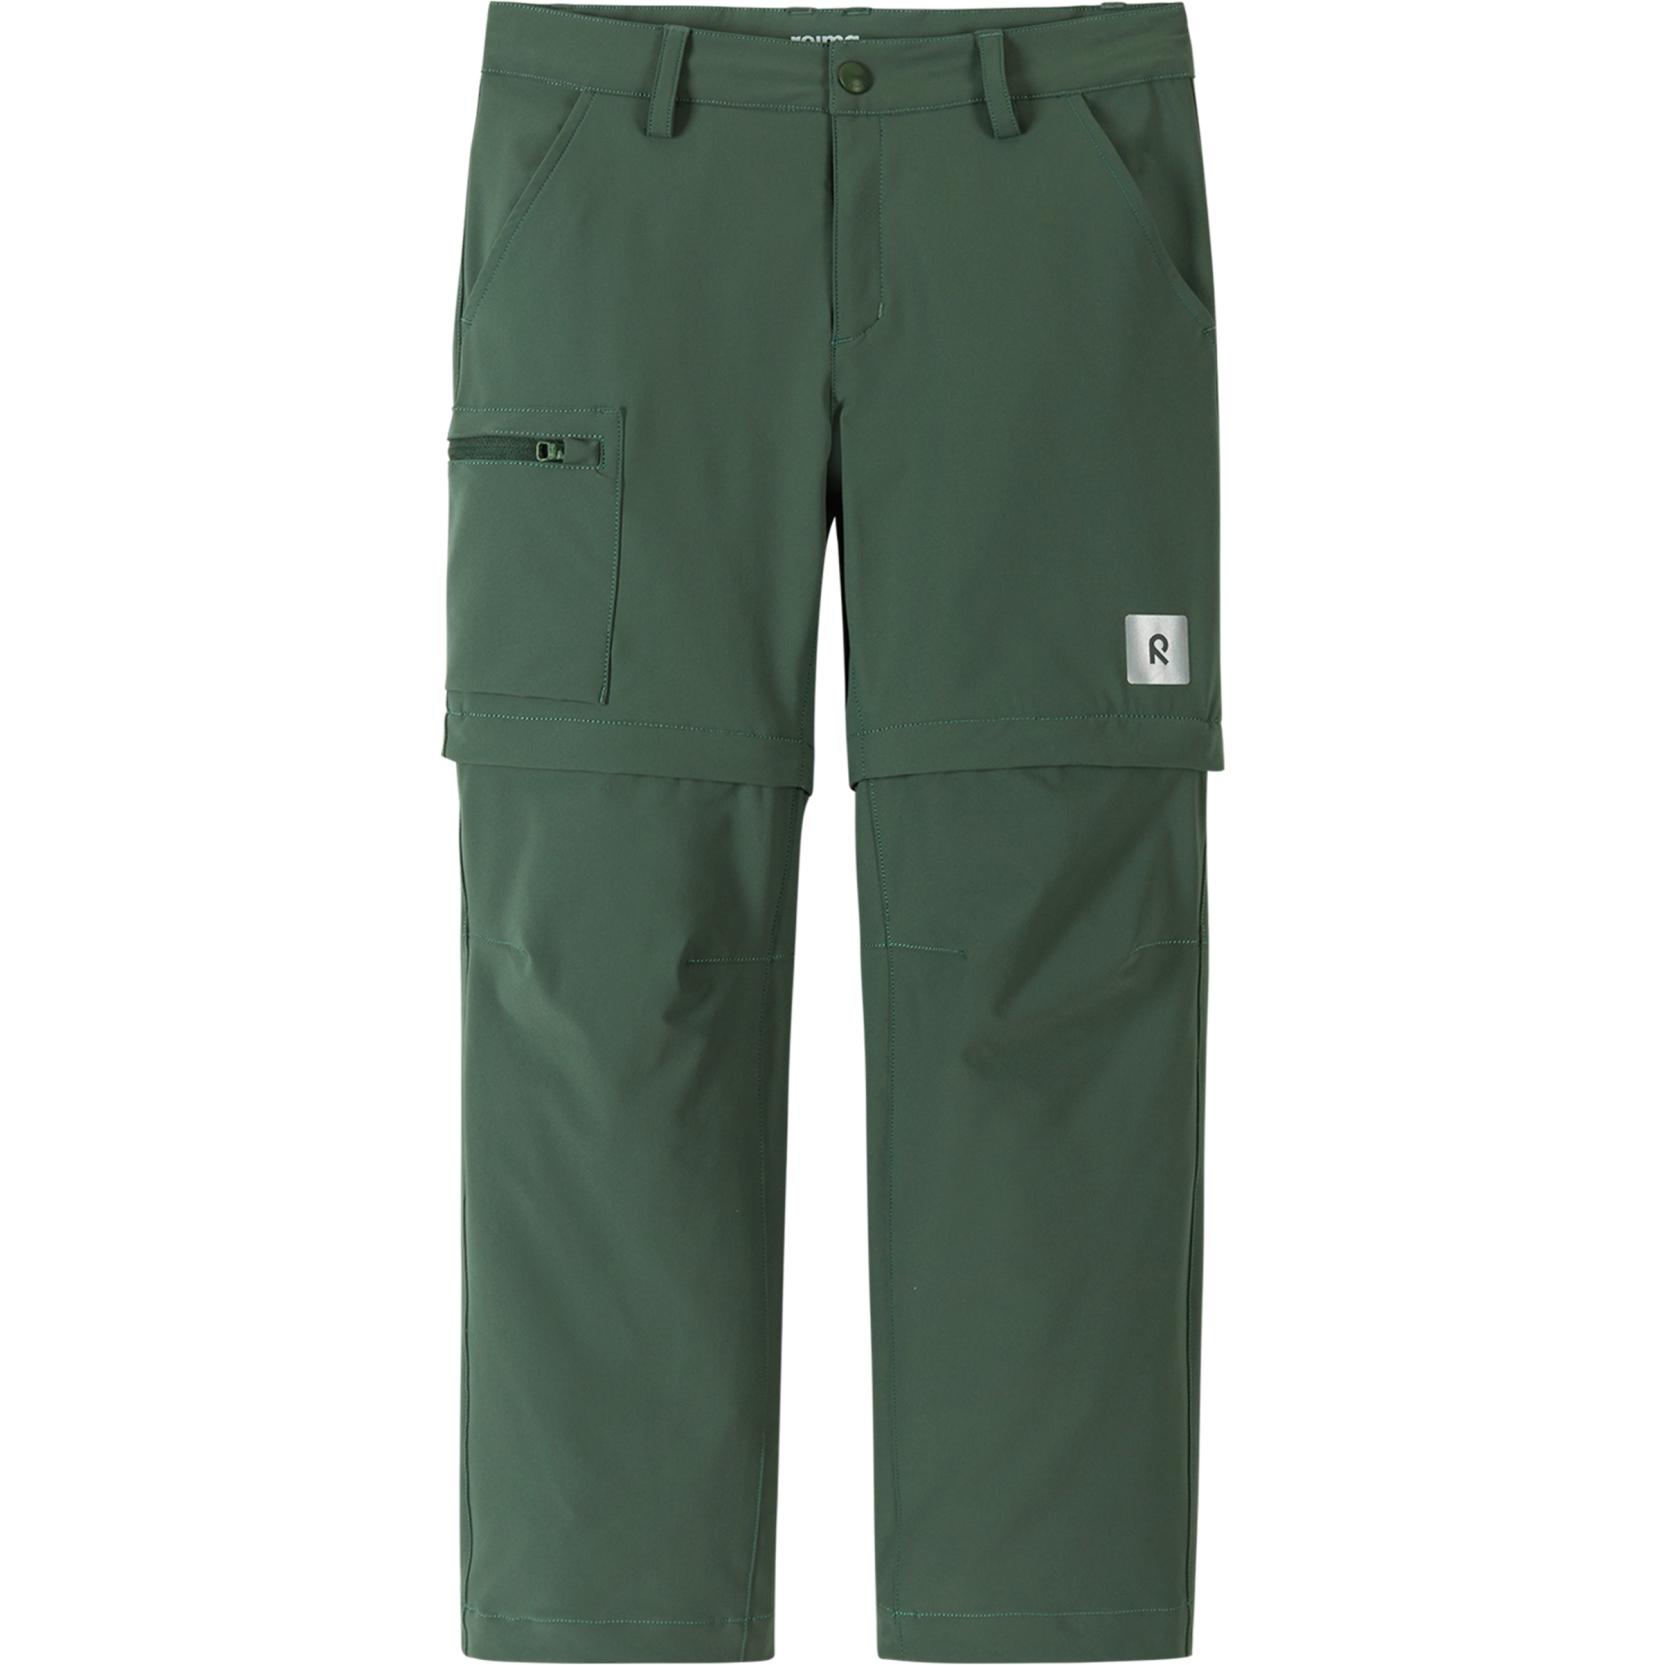 Picture of Reima Sillat Pants Junior - thyme green 8510